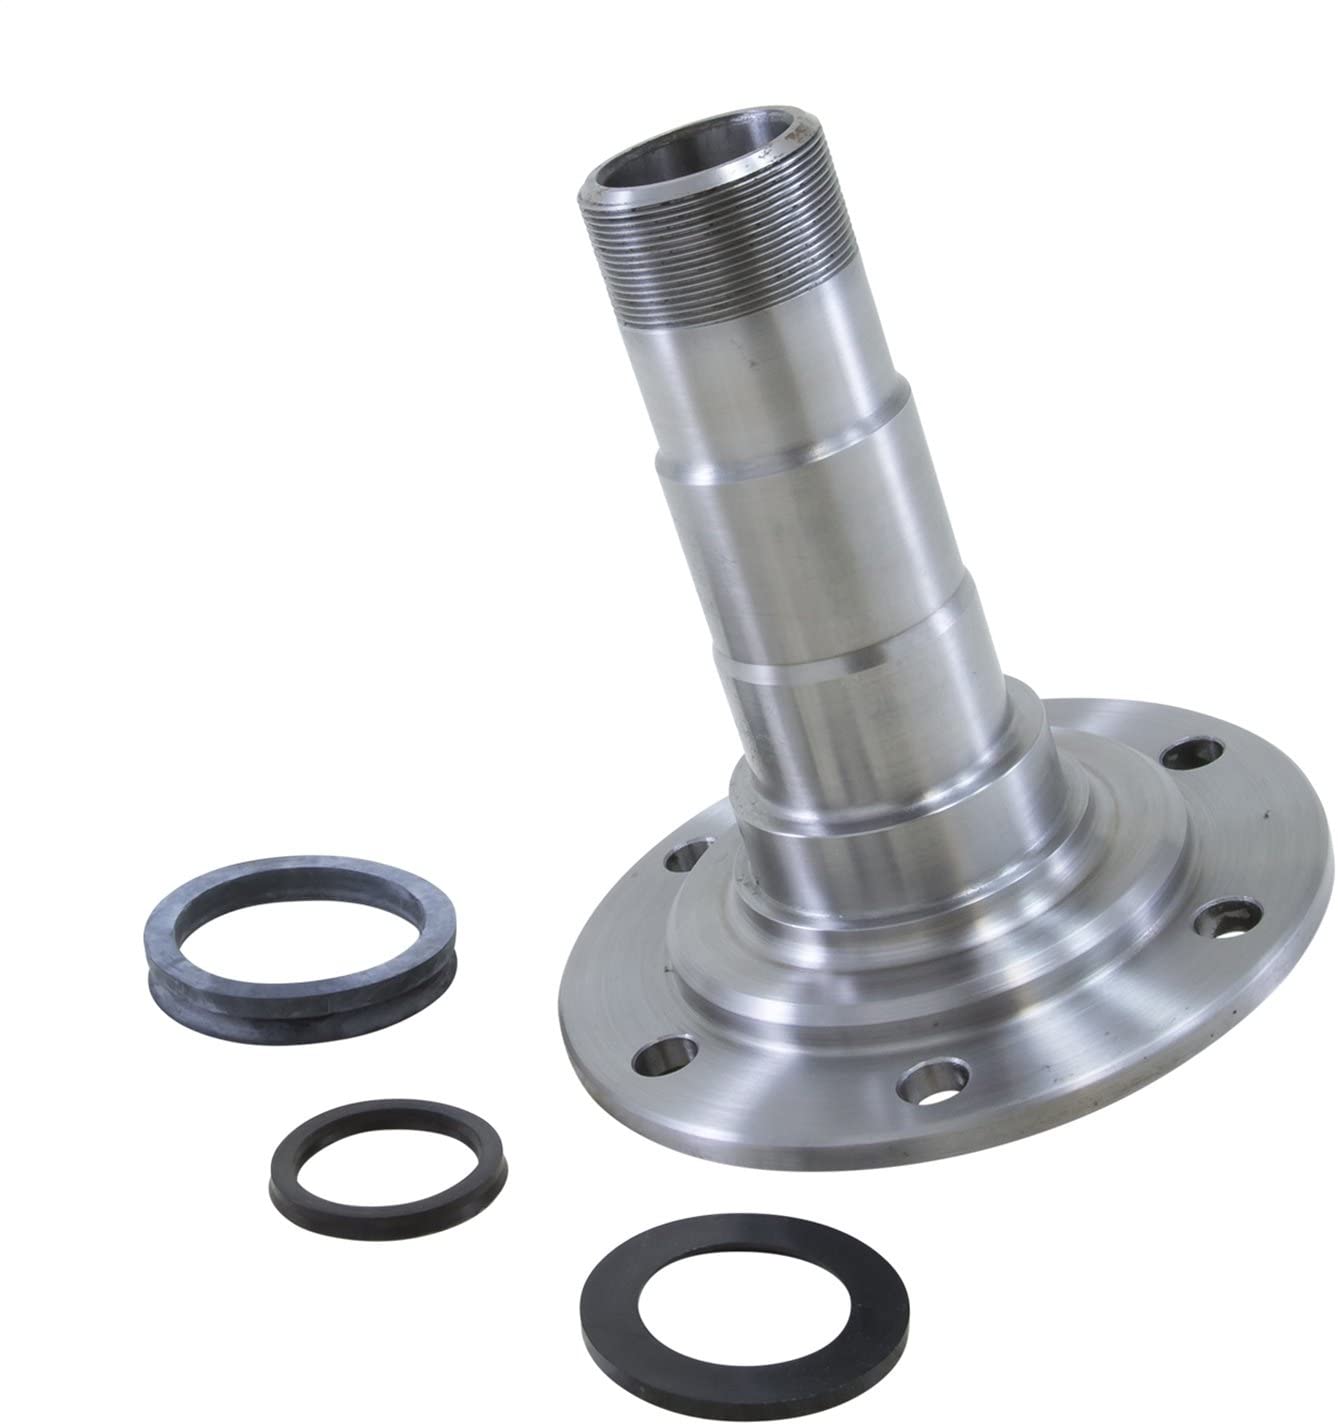 Yukon Gear & Axle (YP SP700013) 6-Hole Front Replacement Spindle for Dana 60 Differential